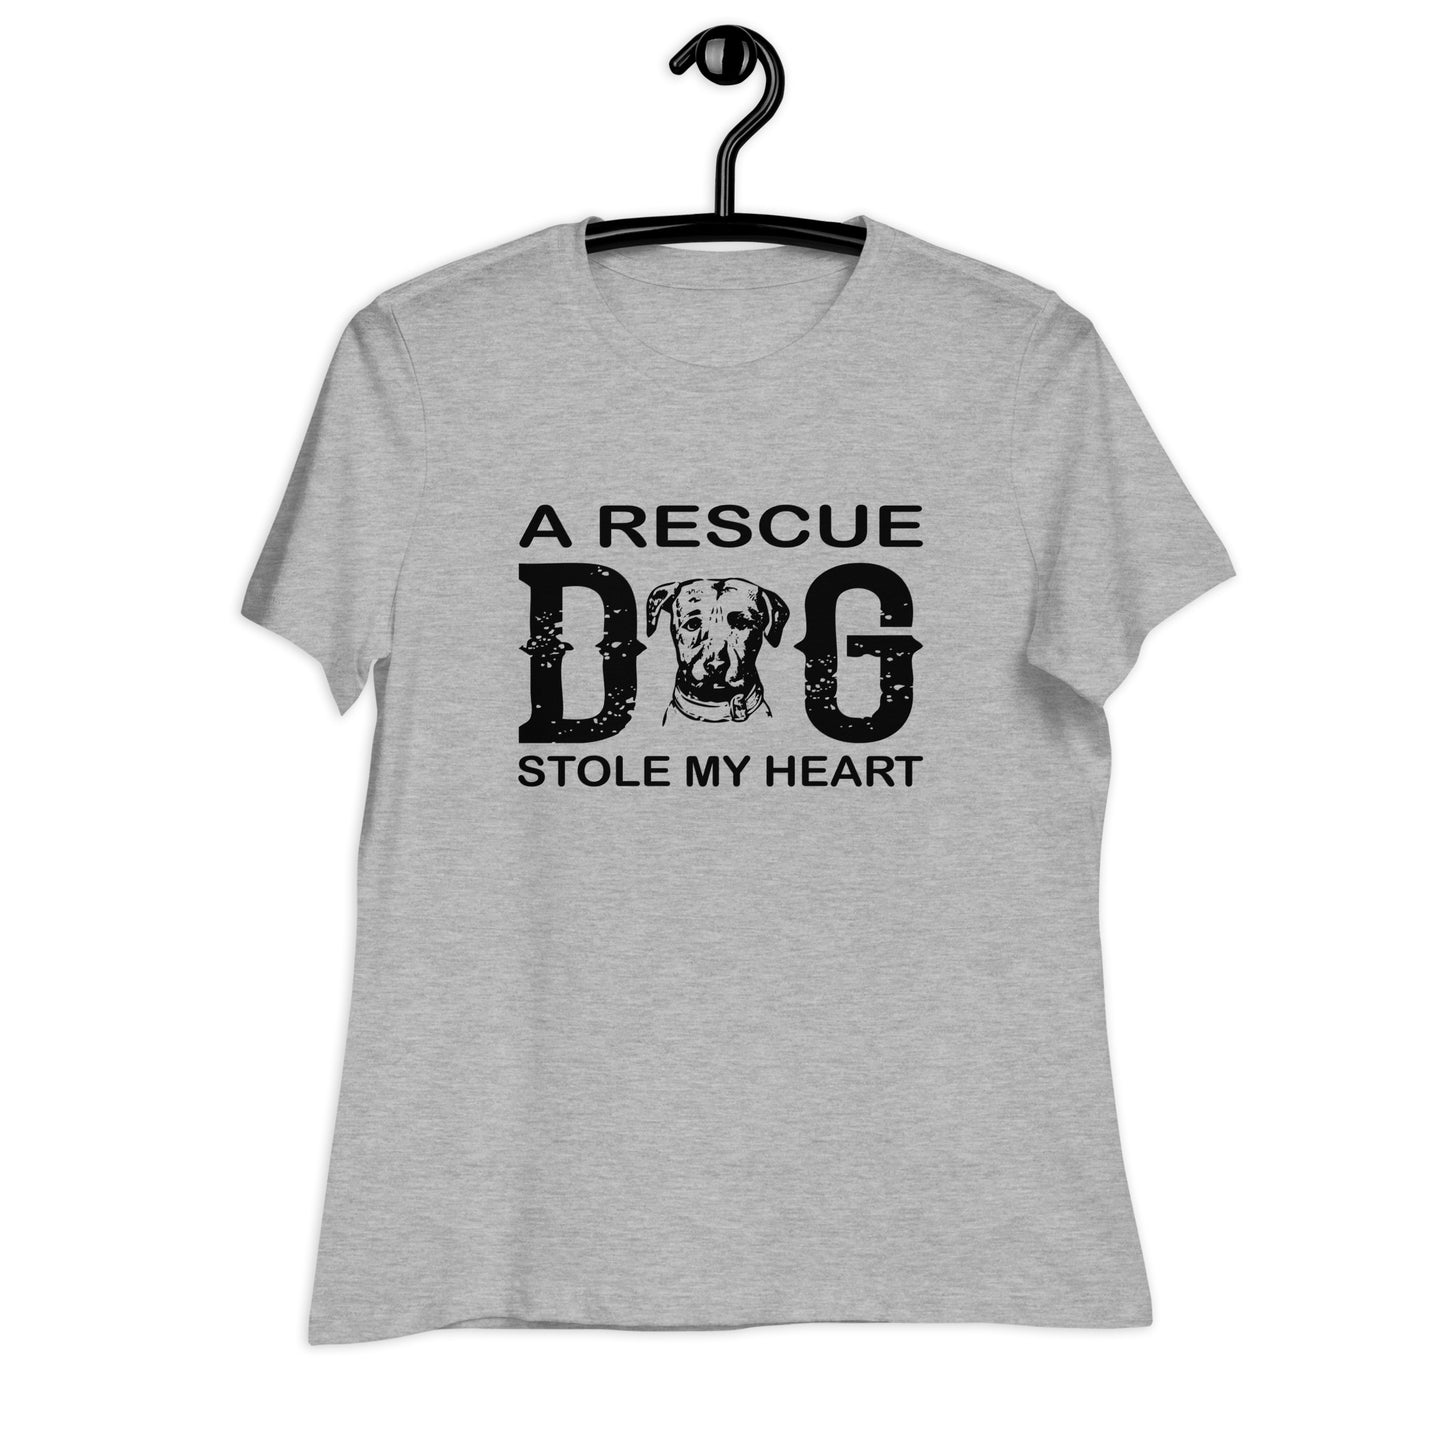 Dog Saying Shirts for Women - A Rescue Dog Stole My Heart